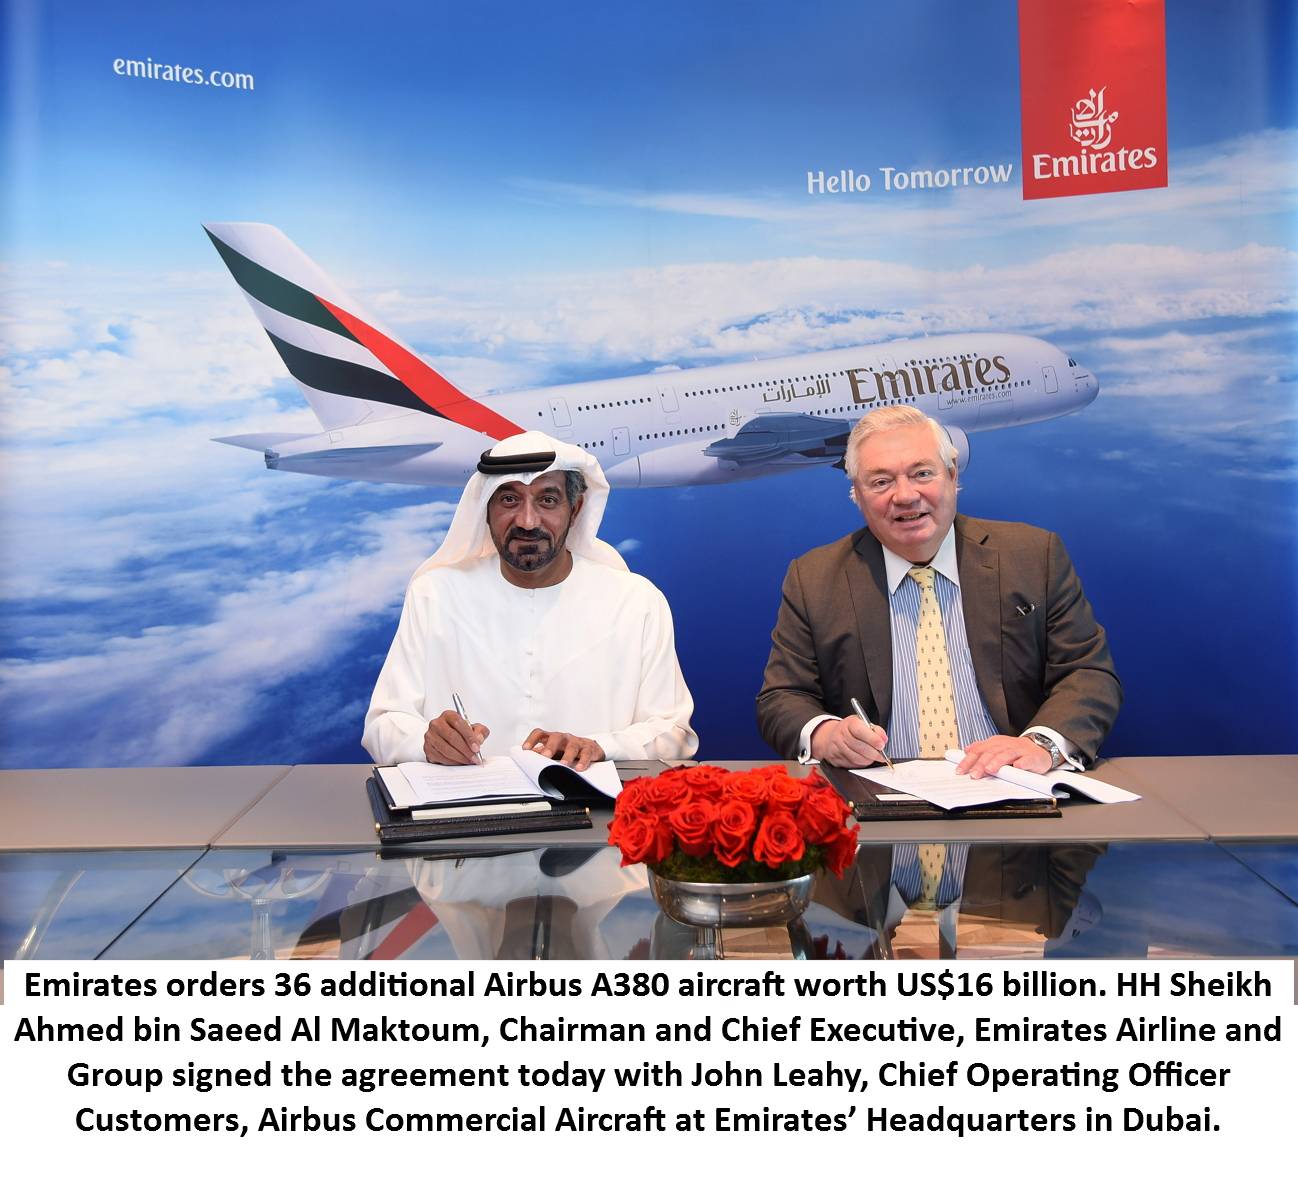 Emirates orders 36 A380s worth US$ 16 billion MOU for 20 firm orders and 16 options signed